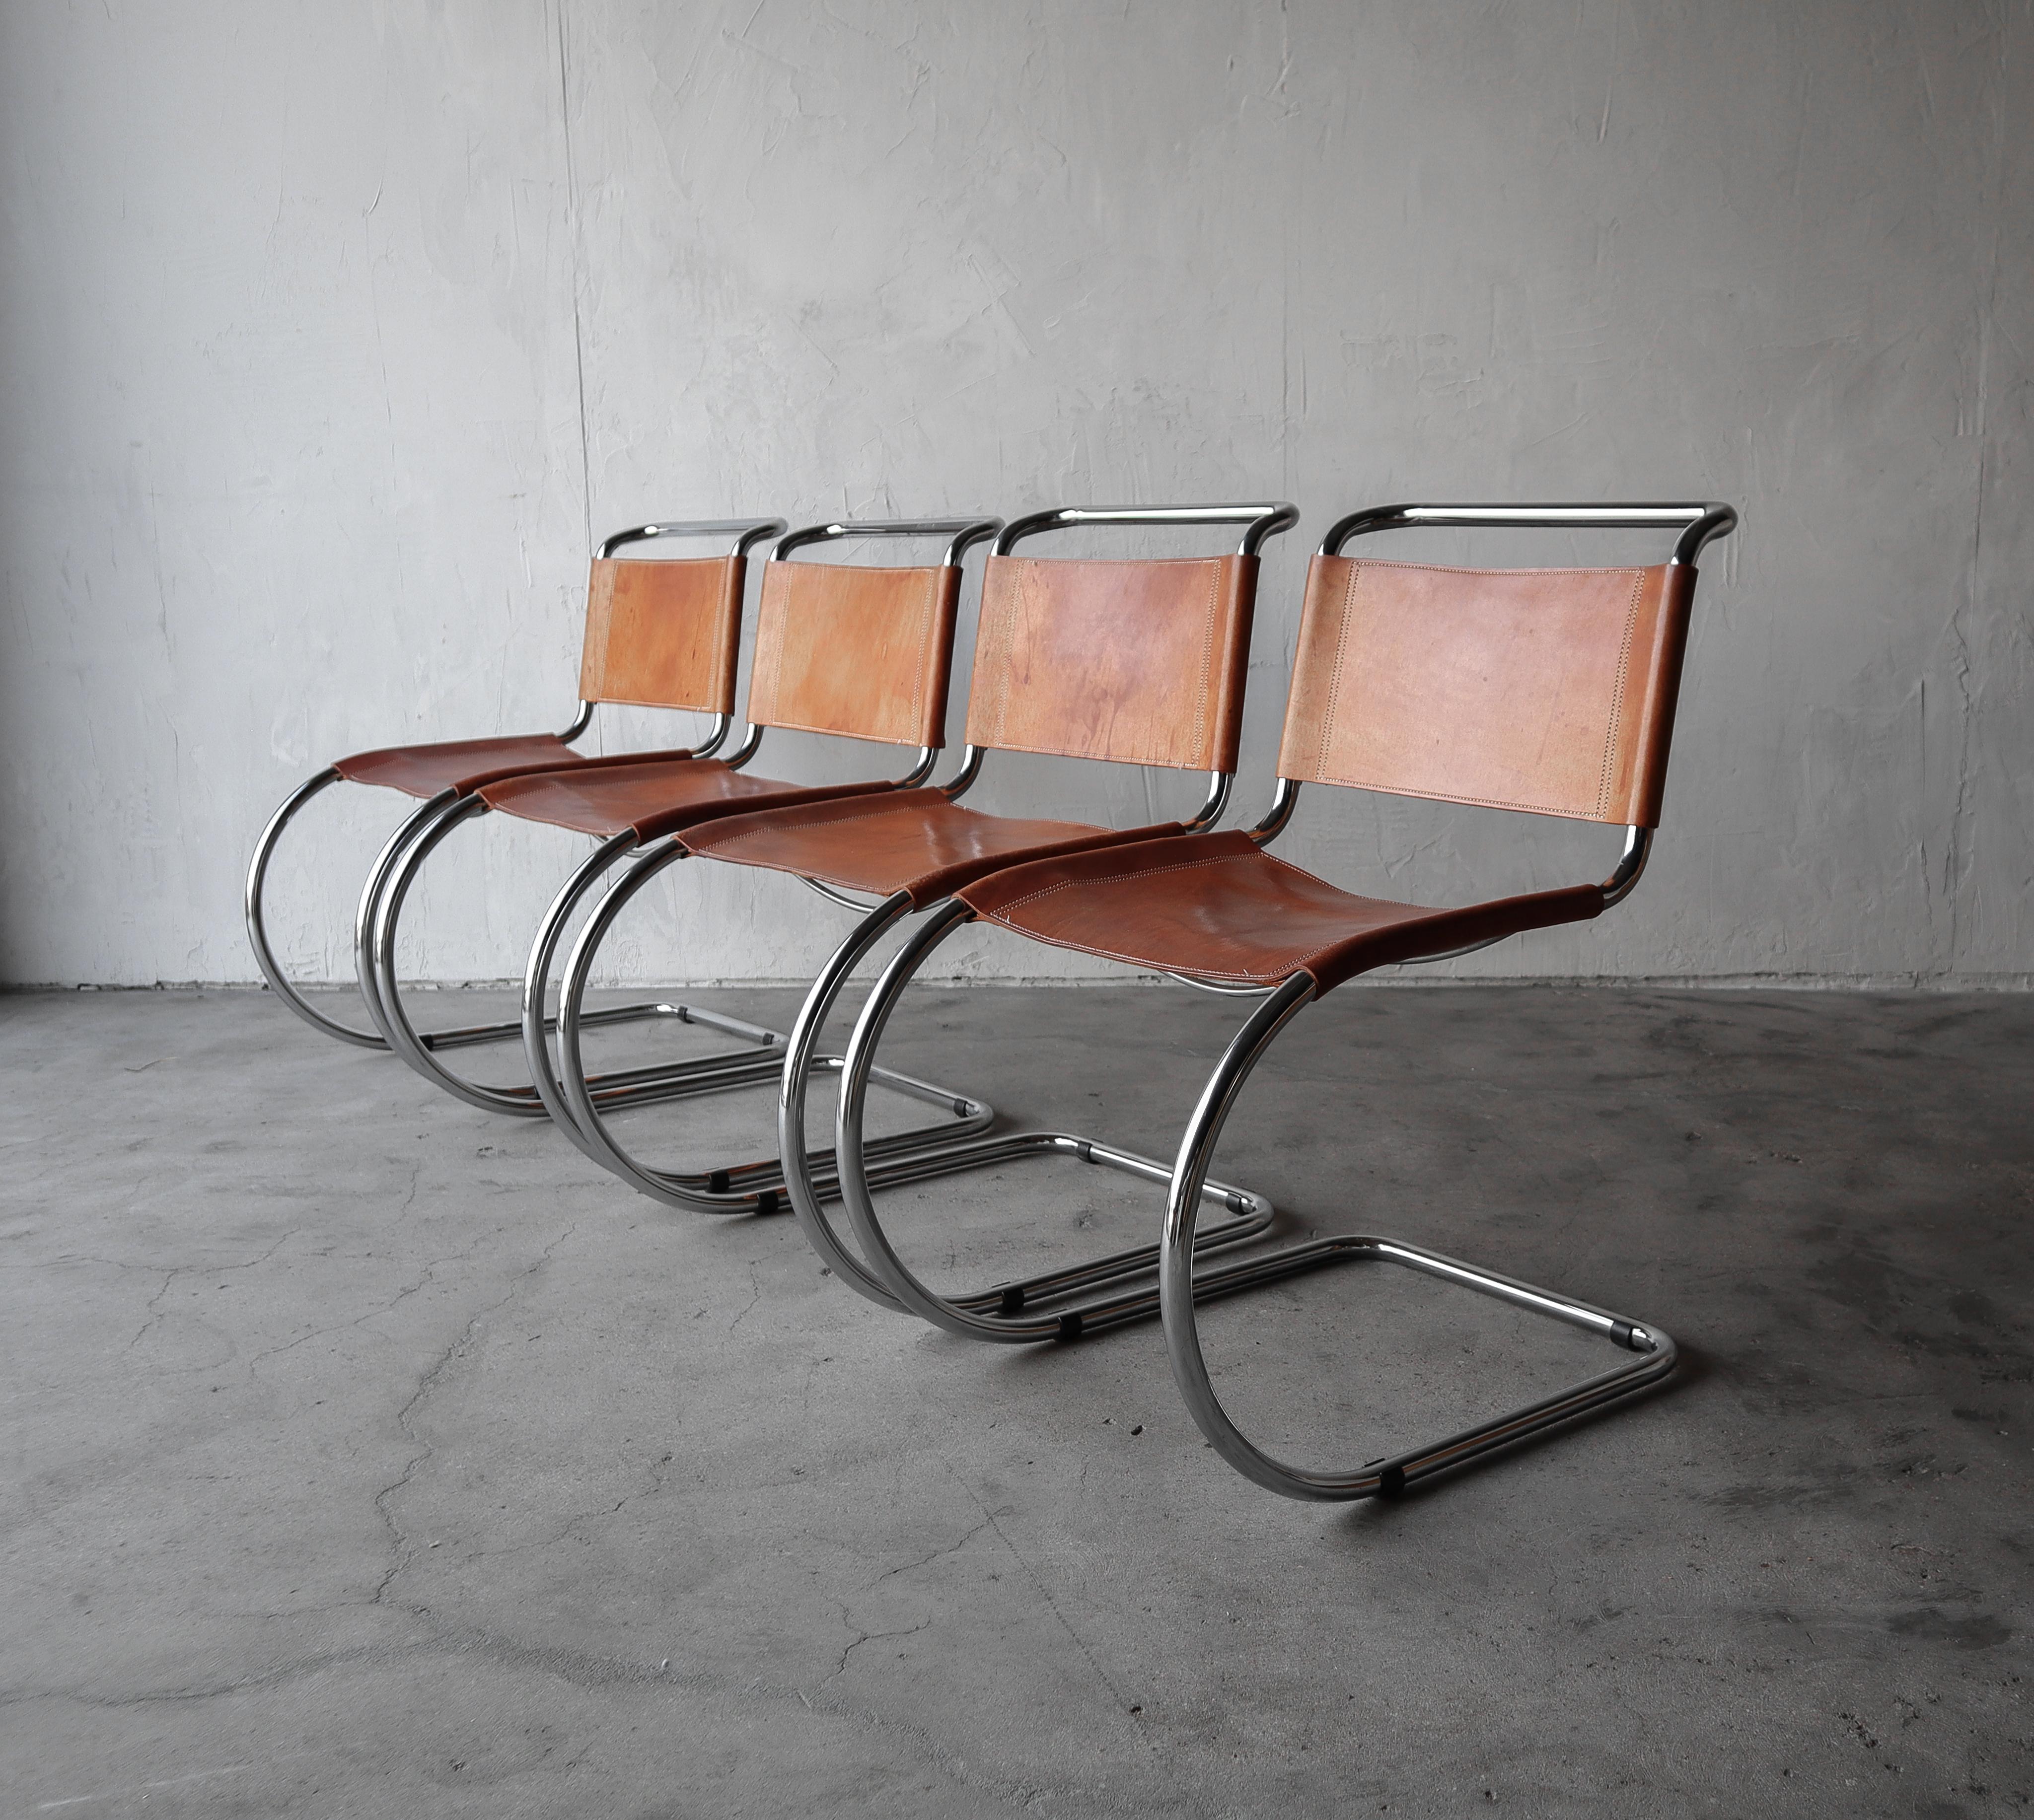 Great set of 4 vintage Bauhaus leather MR10 /S533 Spoleto dining chairs by Ludwig Mies van der Rohe. Chairs have been well loved and the leather shows wonderful patina, one chair has a moisture ring in the seat, see images for details. Chrome is